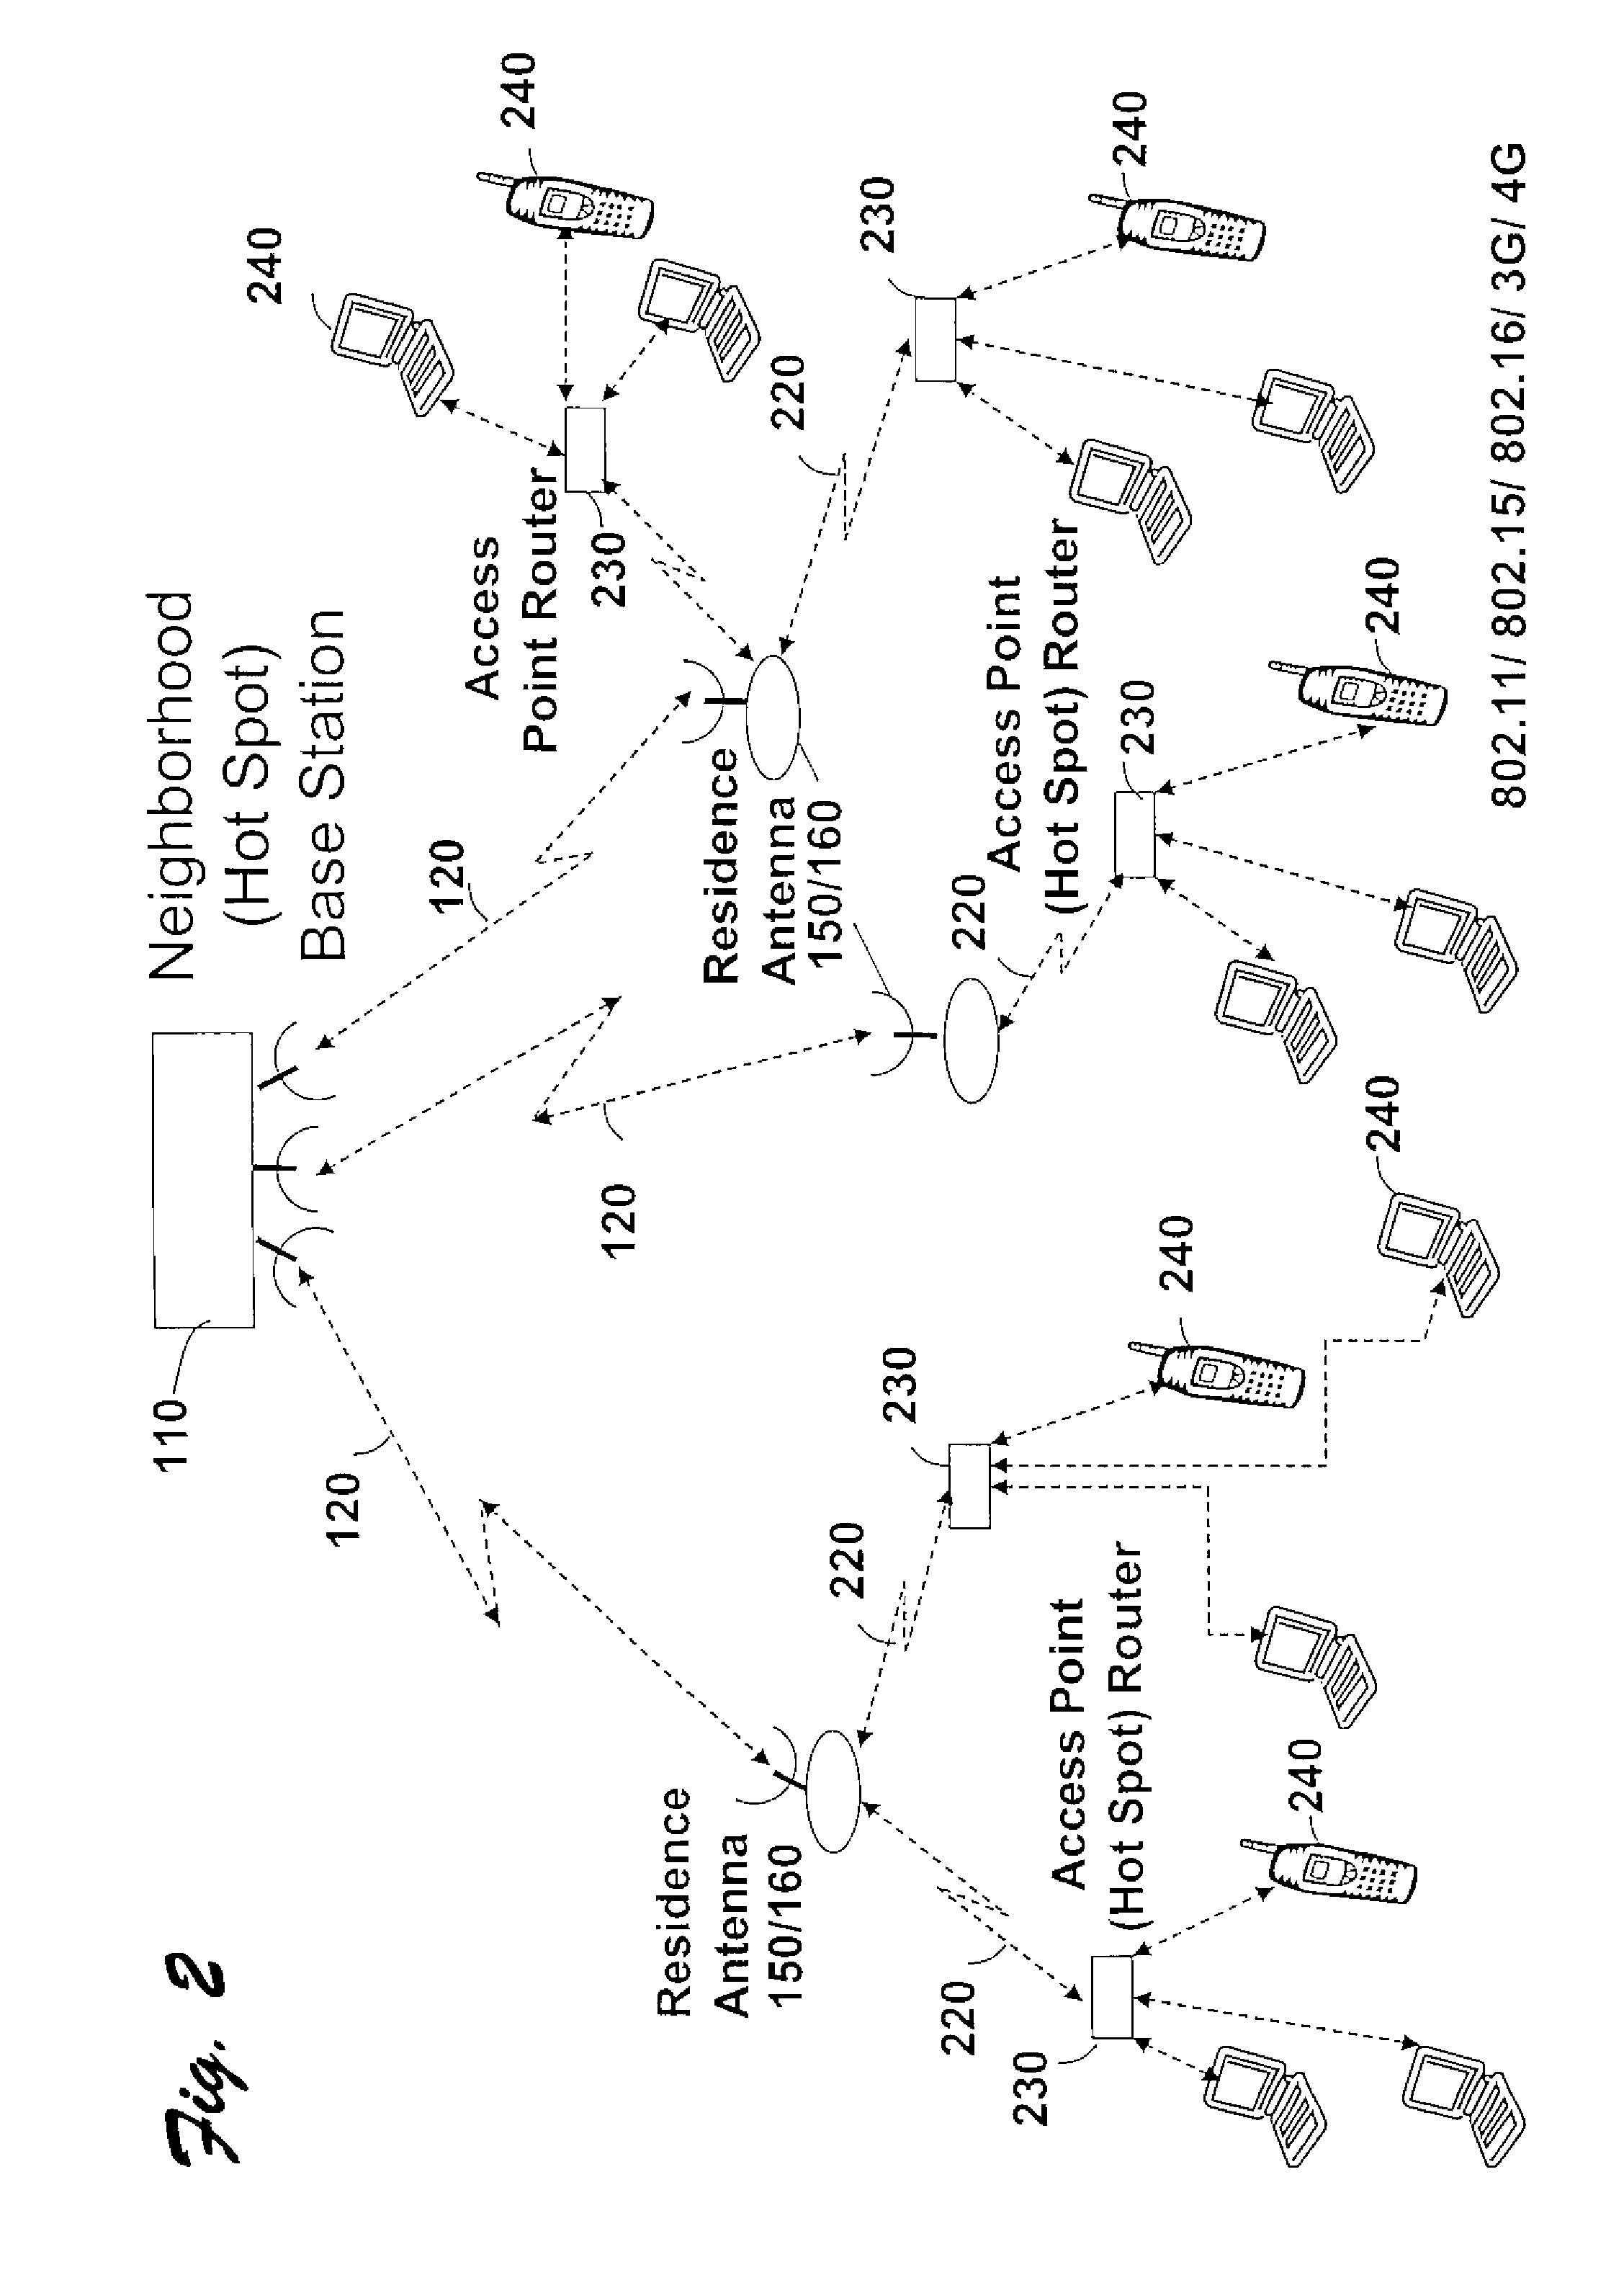 Directional antenna sectoring system and methodology